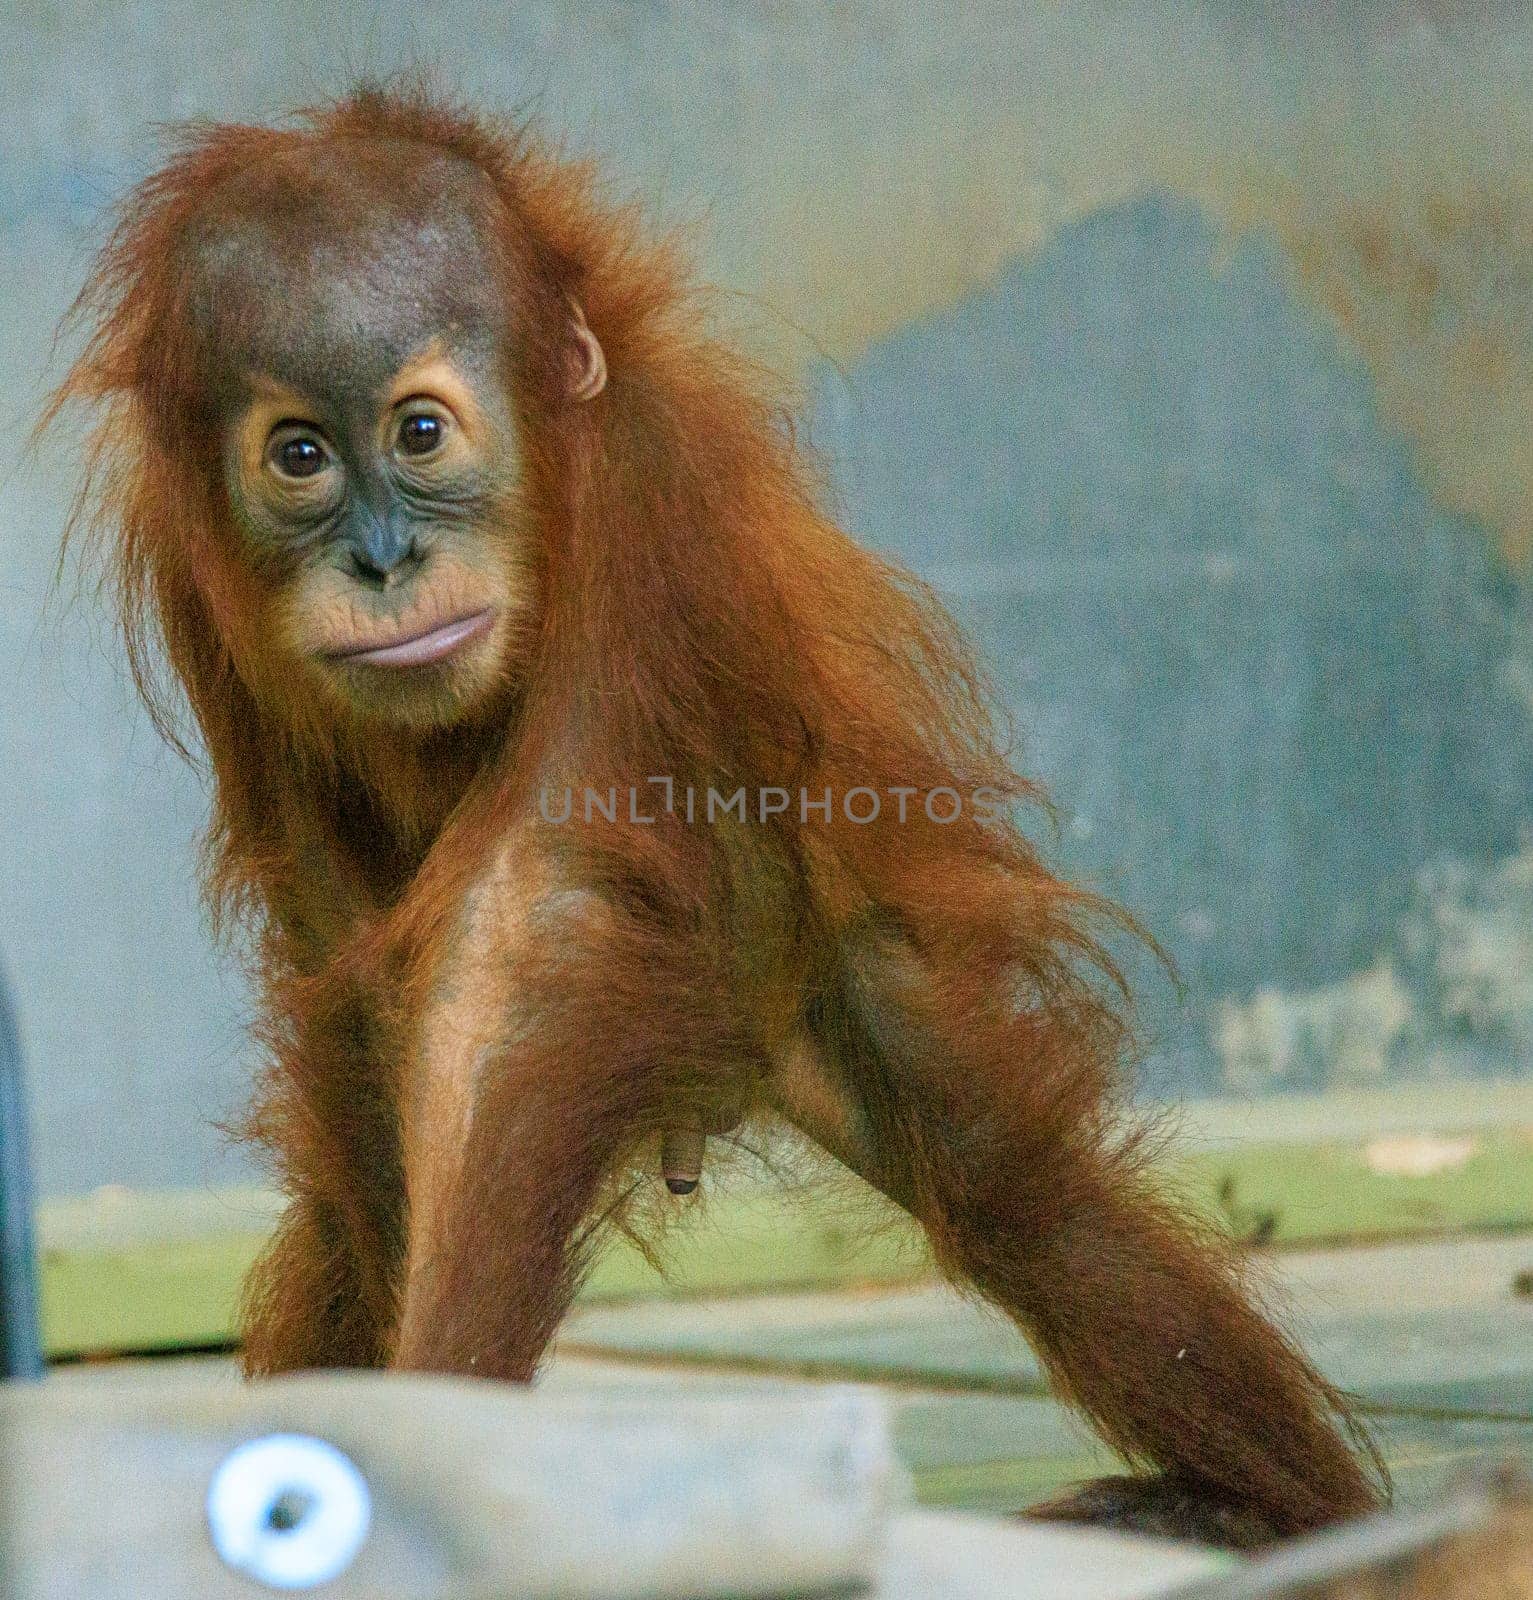 Baby Orangutan Looks Around For Someone to Play With by althephotographer